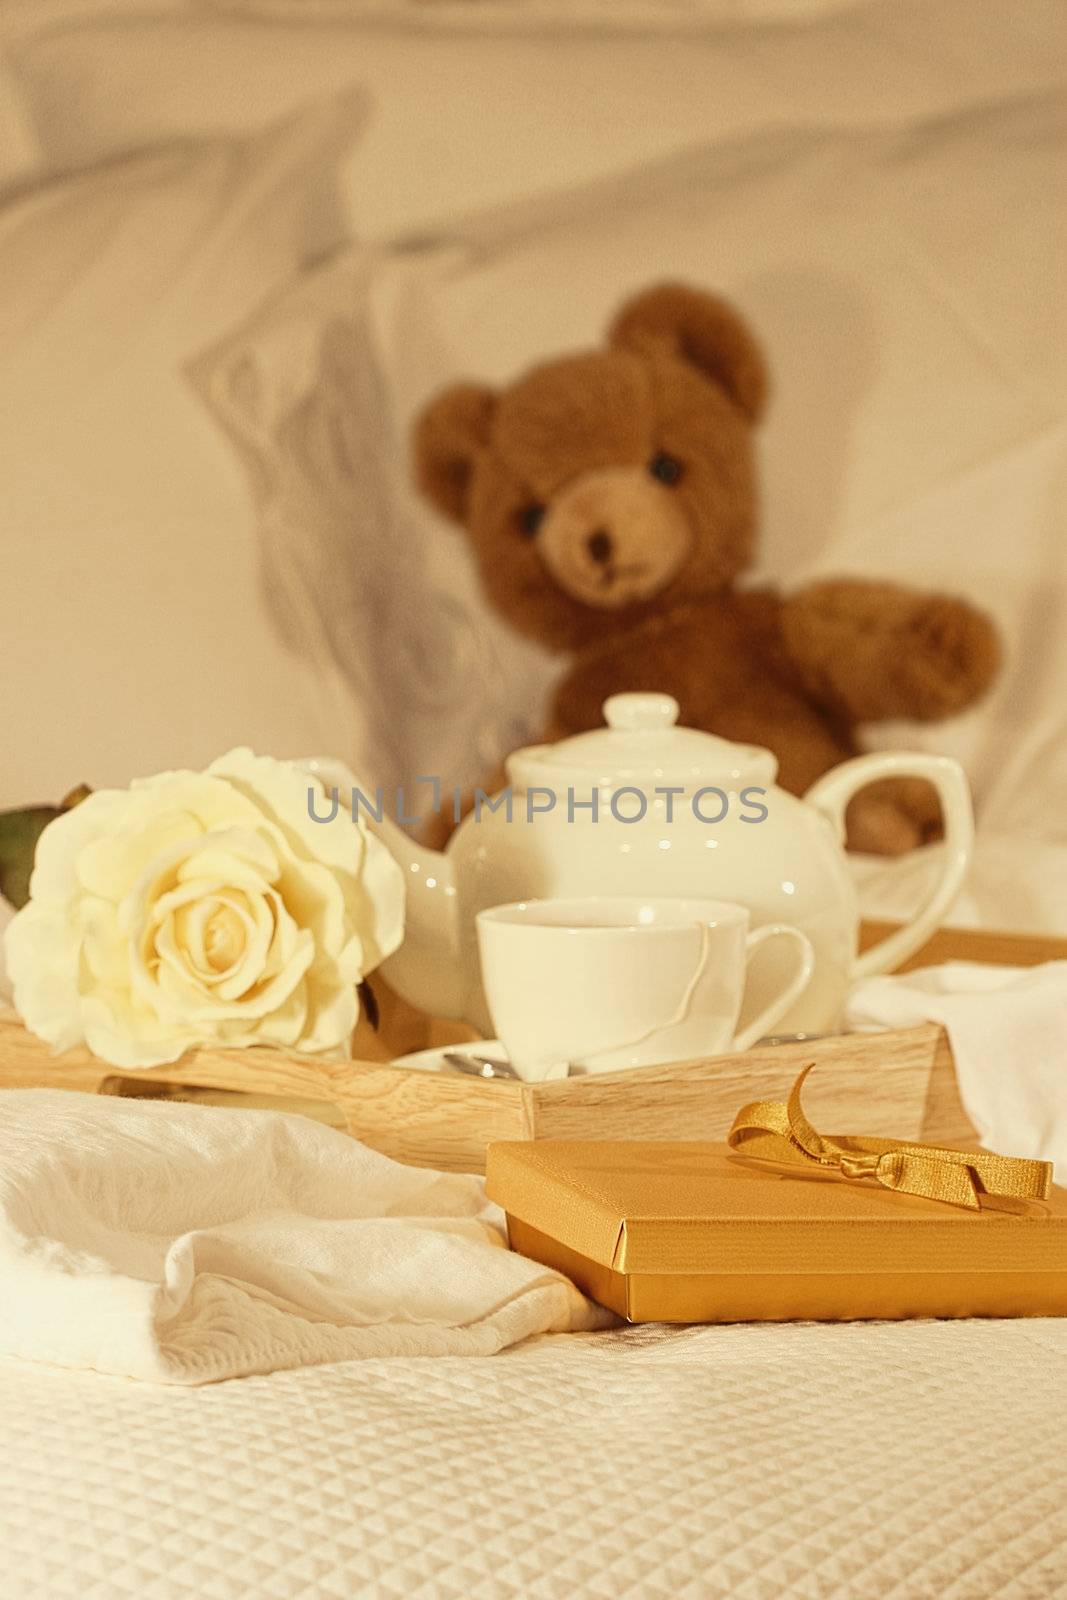 Breakfast in bed with tea and gift by Sandralise